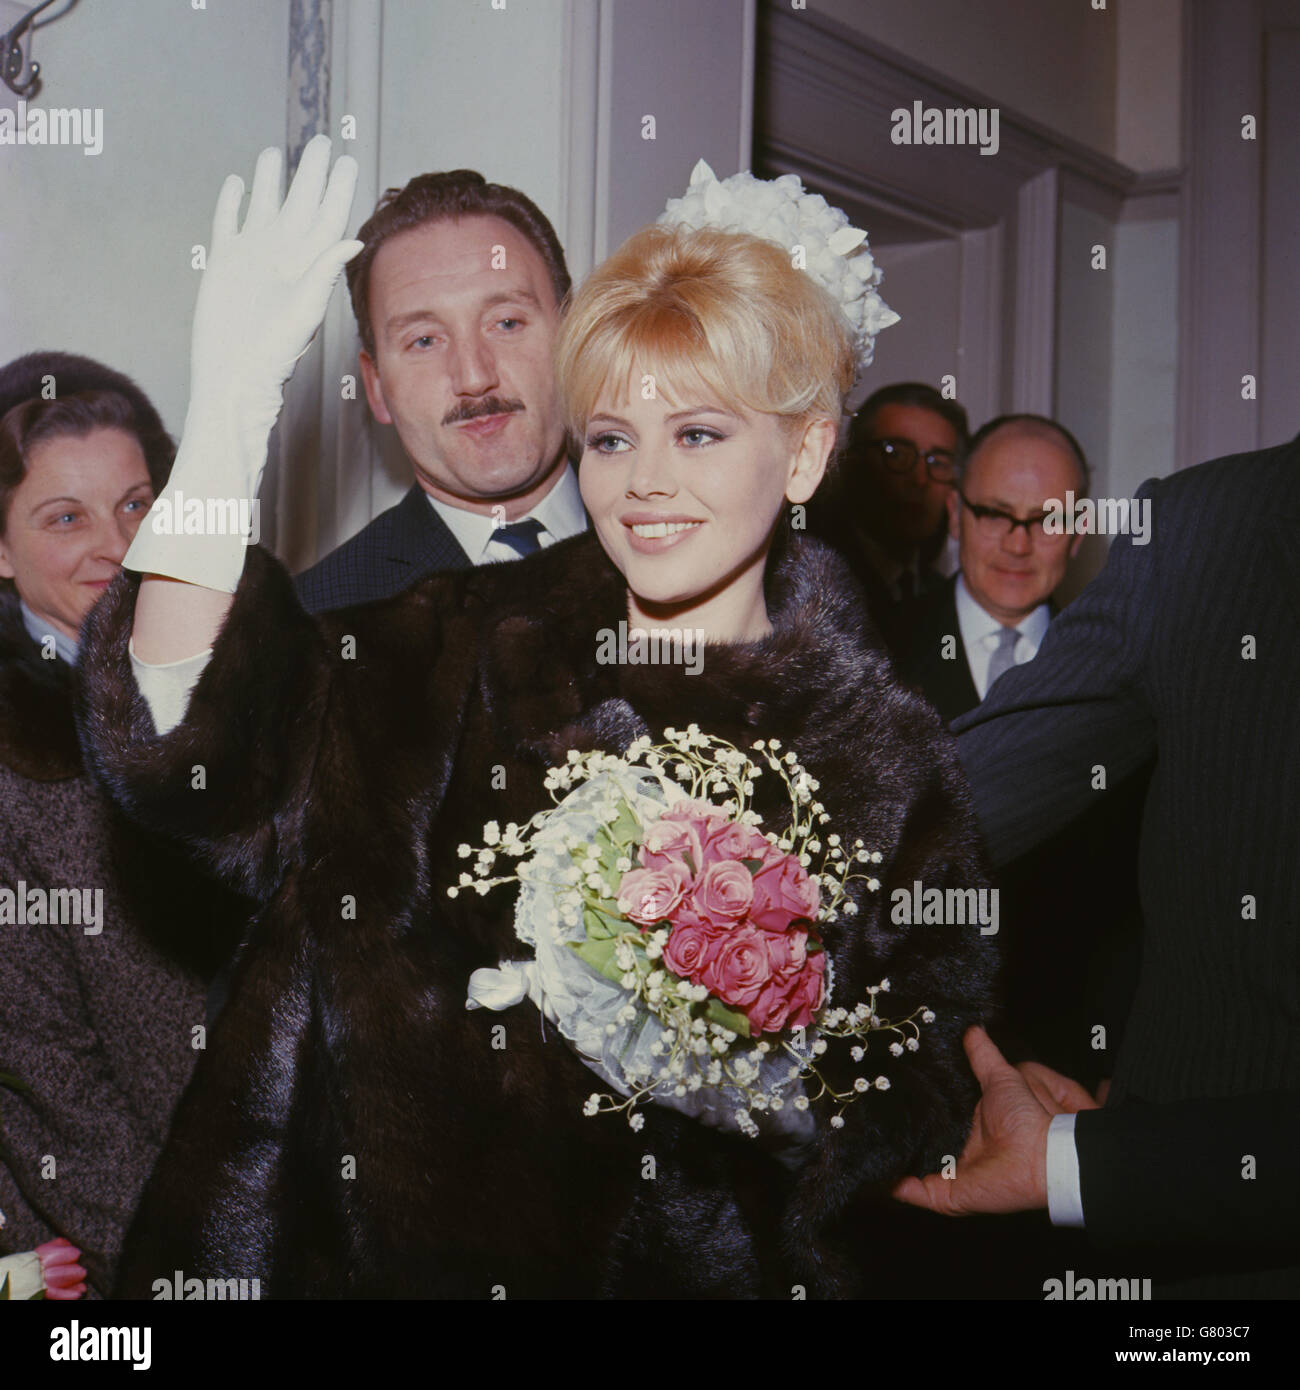 Swedish actress Britt Ekland waves to photographers after her wedding to English actor Peter Sellers at Guildford registery office, Surrey. The couple had known each other only a month. The bride is wearing a gown by Norman Hartnell and she carries pink roses and lillies of the valley. Her hat is a small pillbox covered in white fantasy flowers. Sellers wears a dark blue suit. After the ceremony, more than 1000 fans came to see the couple leave in their car. Stock Photo